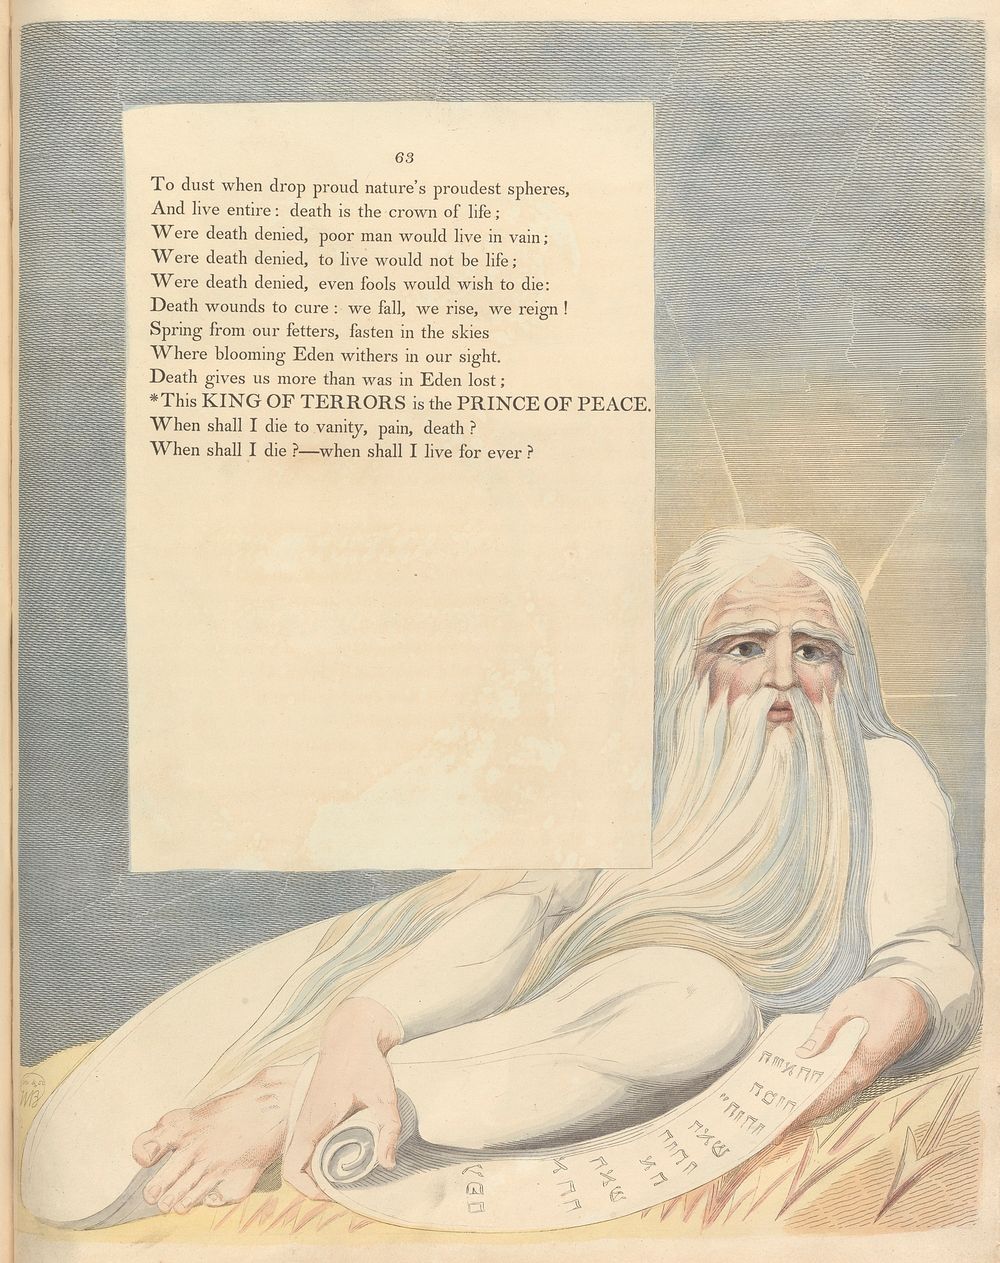 Young's Night Thoughts, Page 63, "This King of Terrors is the Prince of Peace" by William Blake.